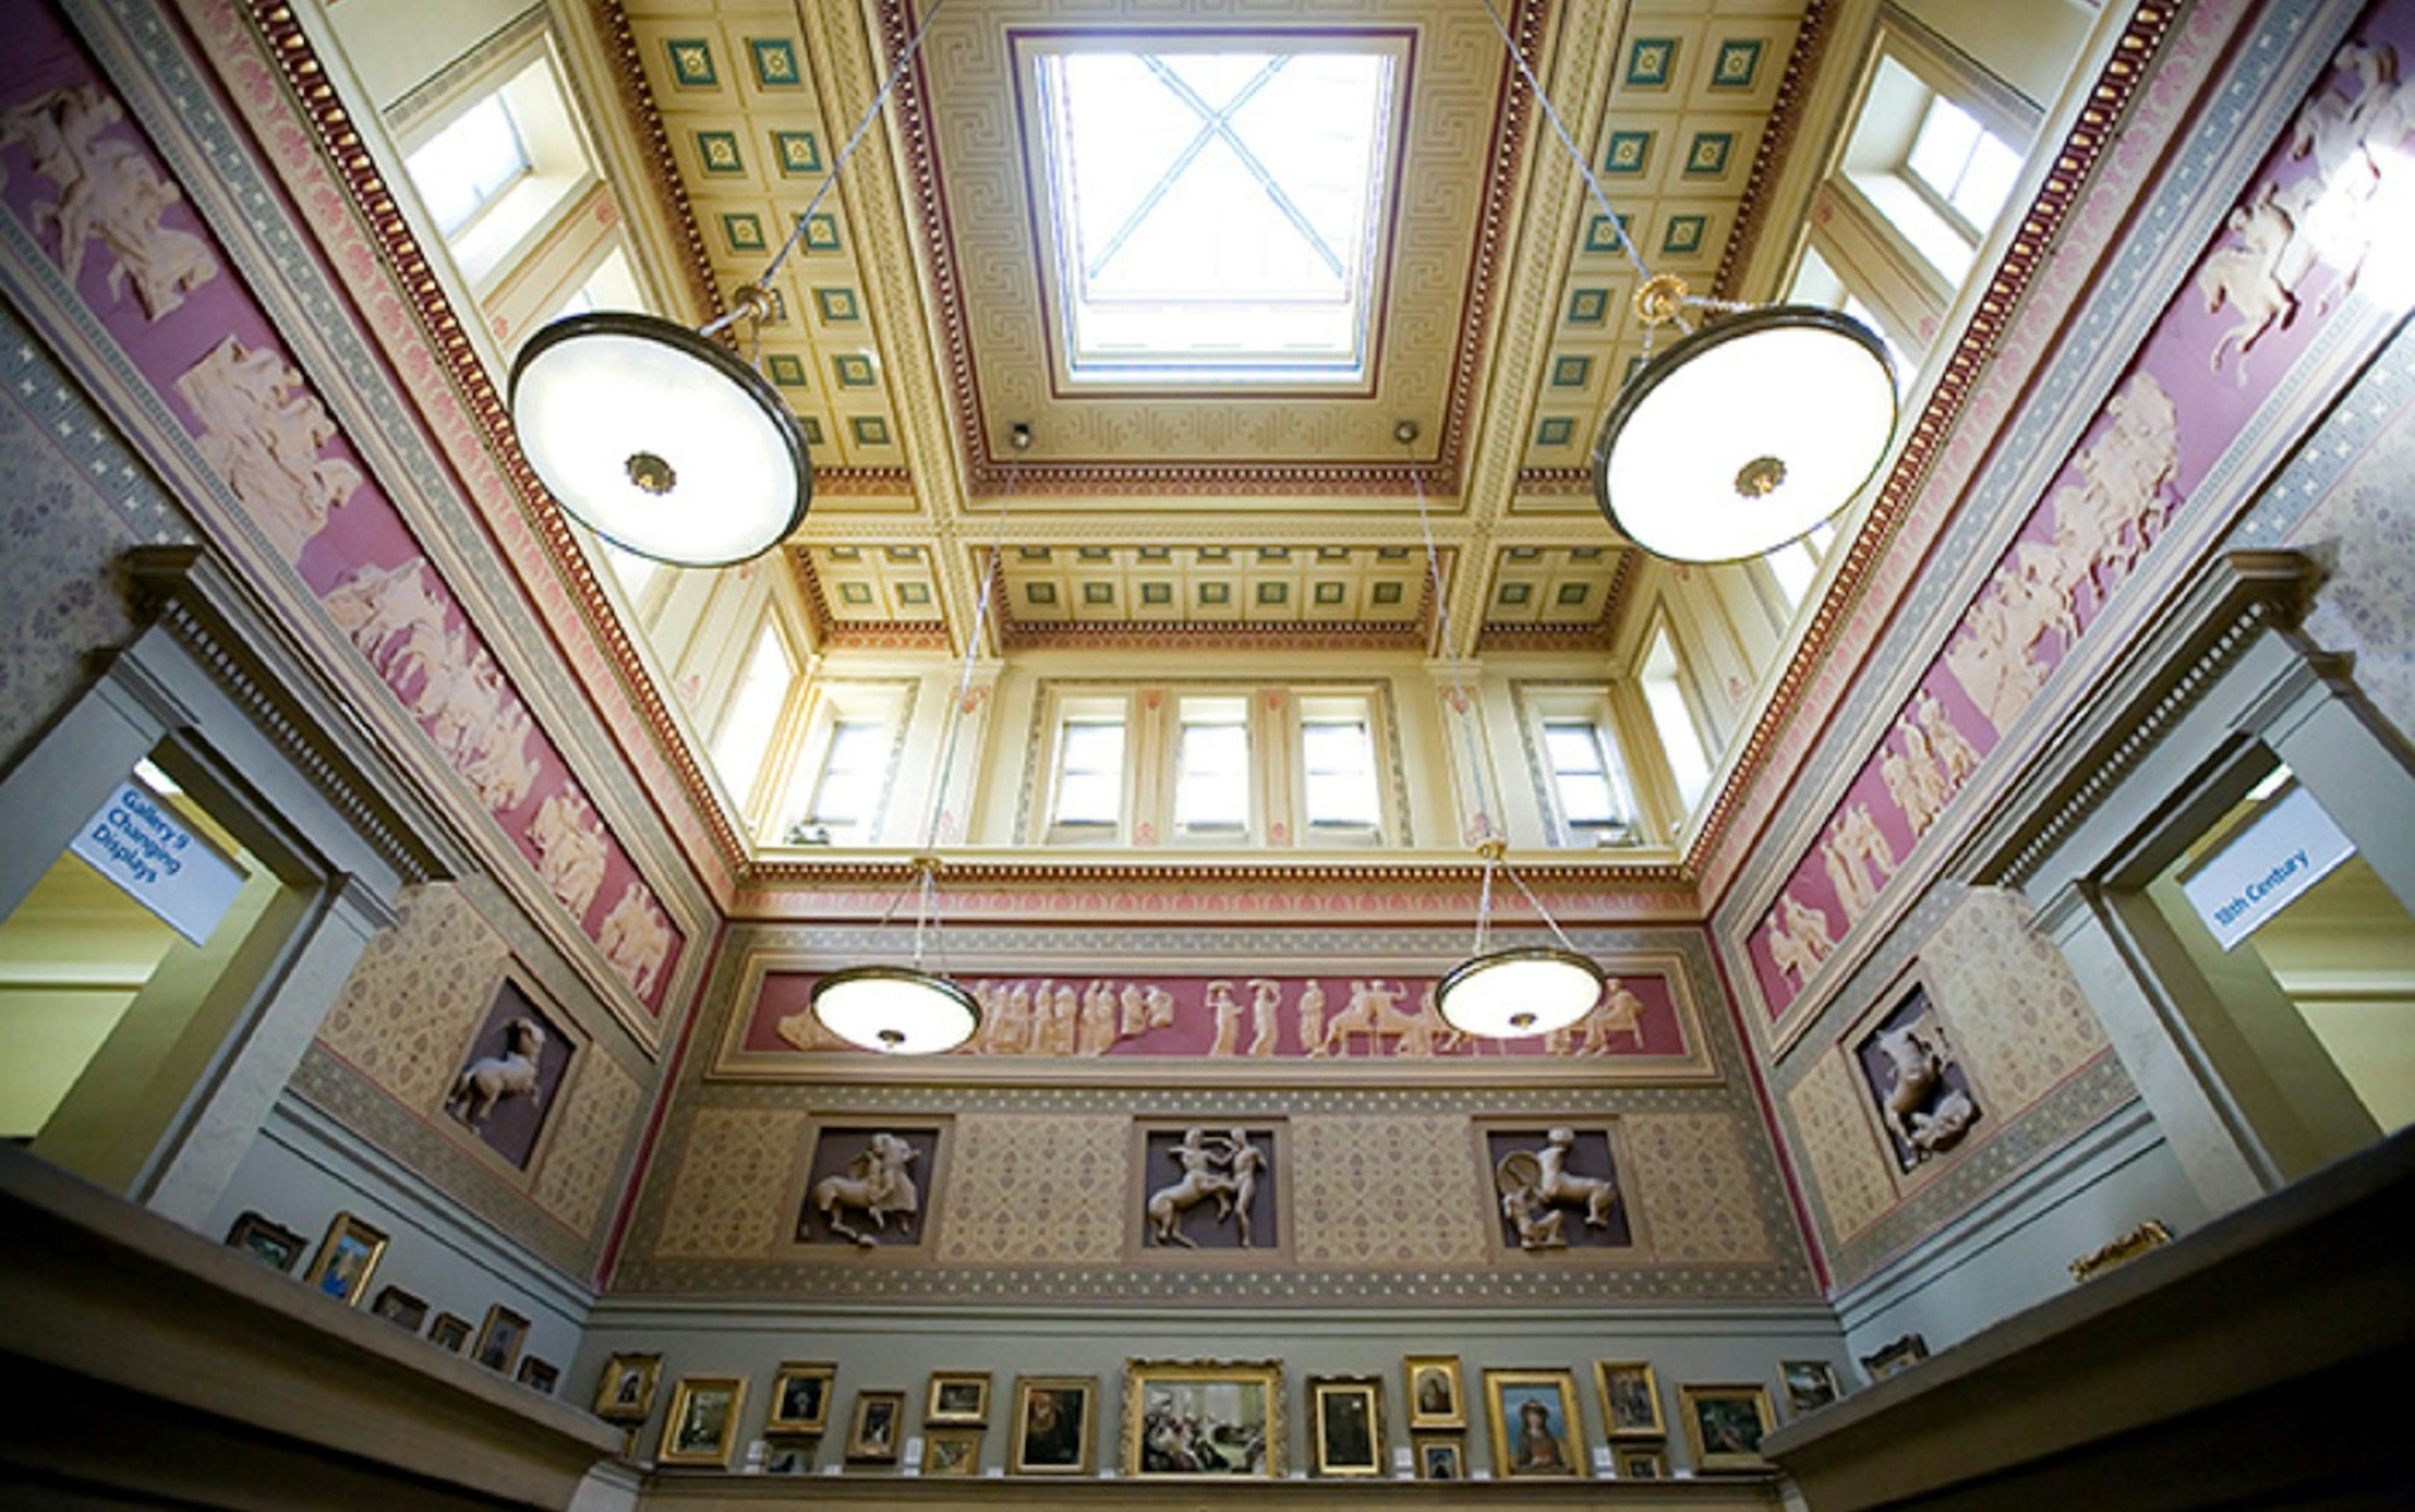 Manchester Art Gallery - Victorian Hall image 1